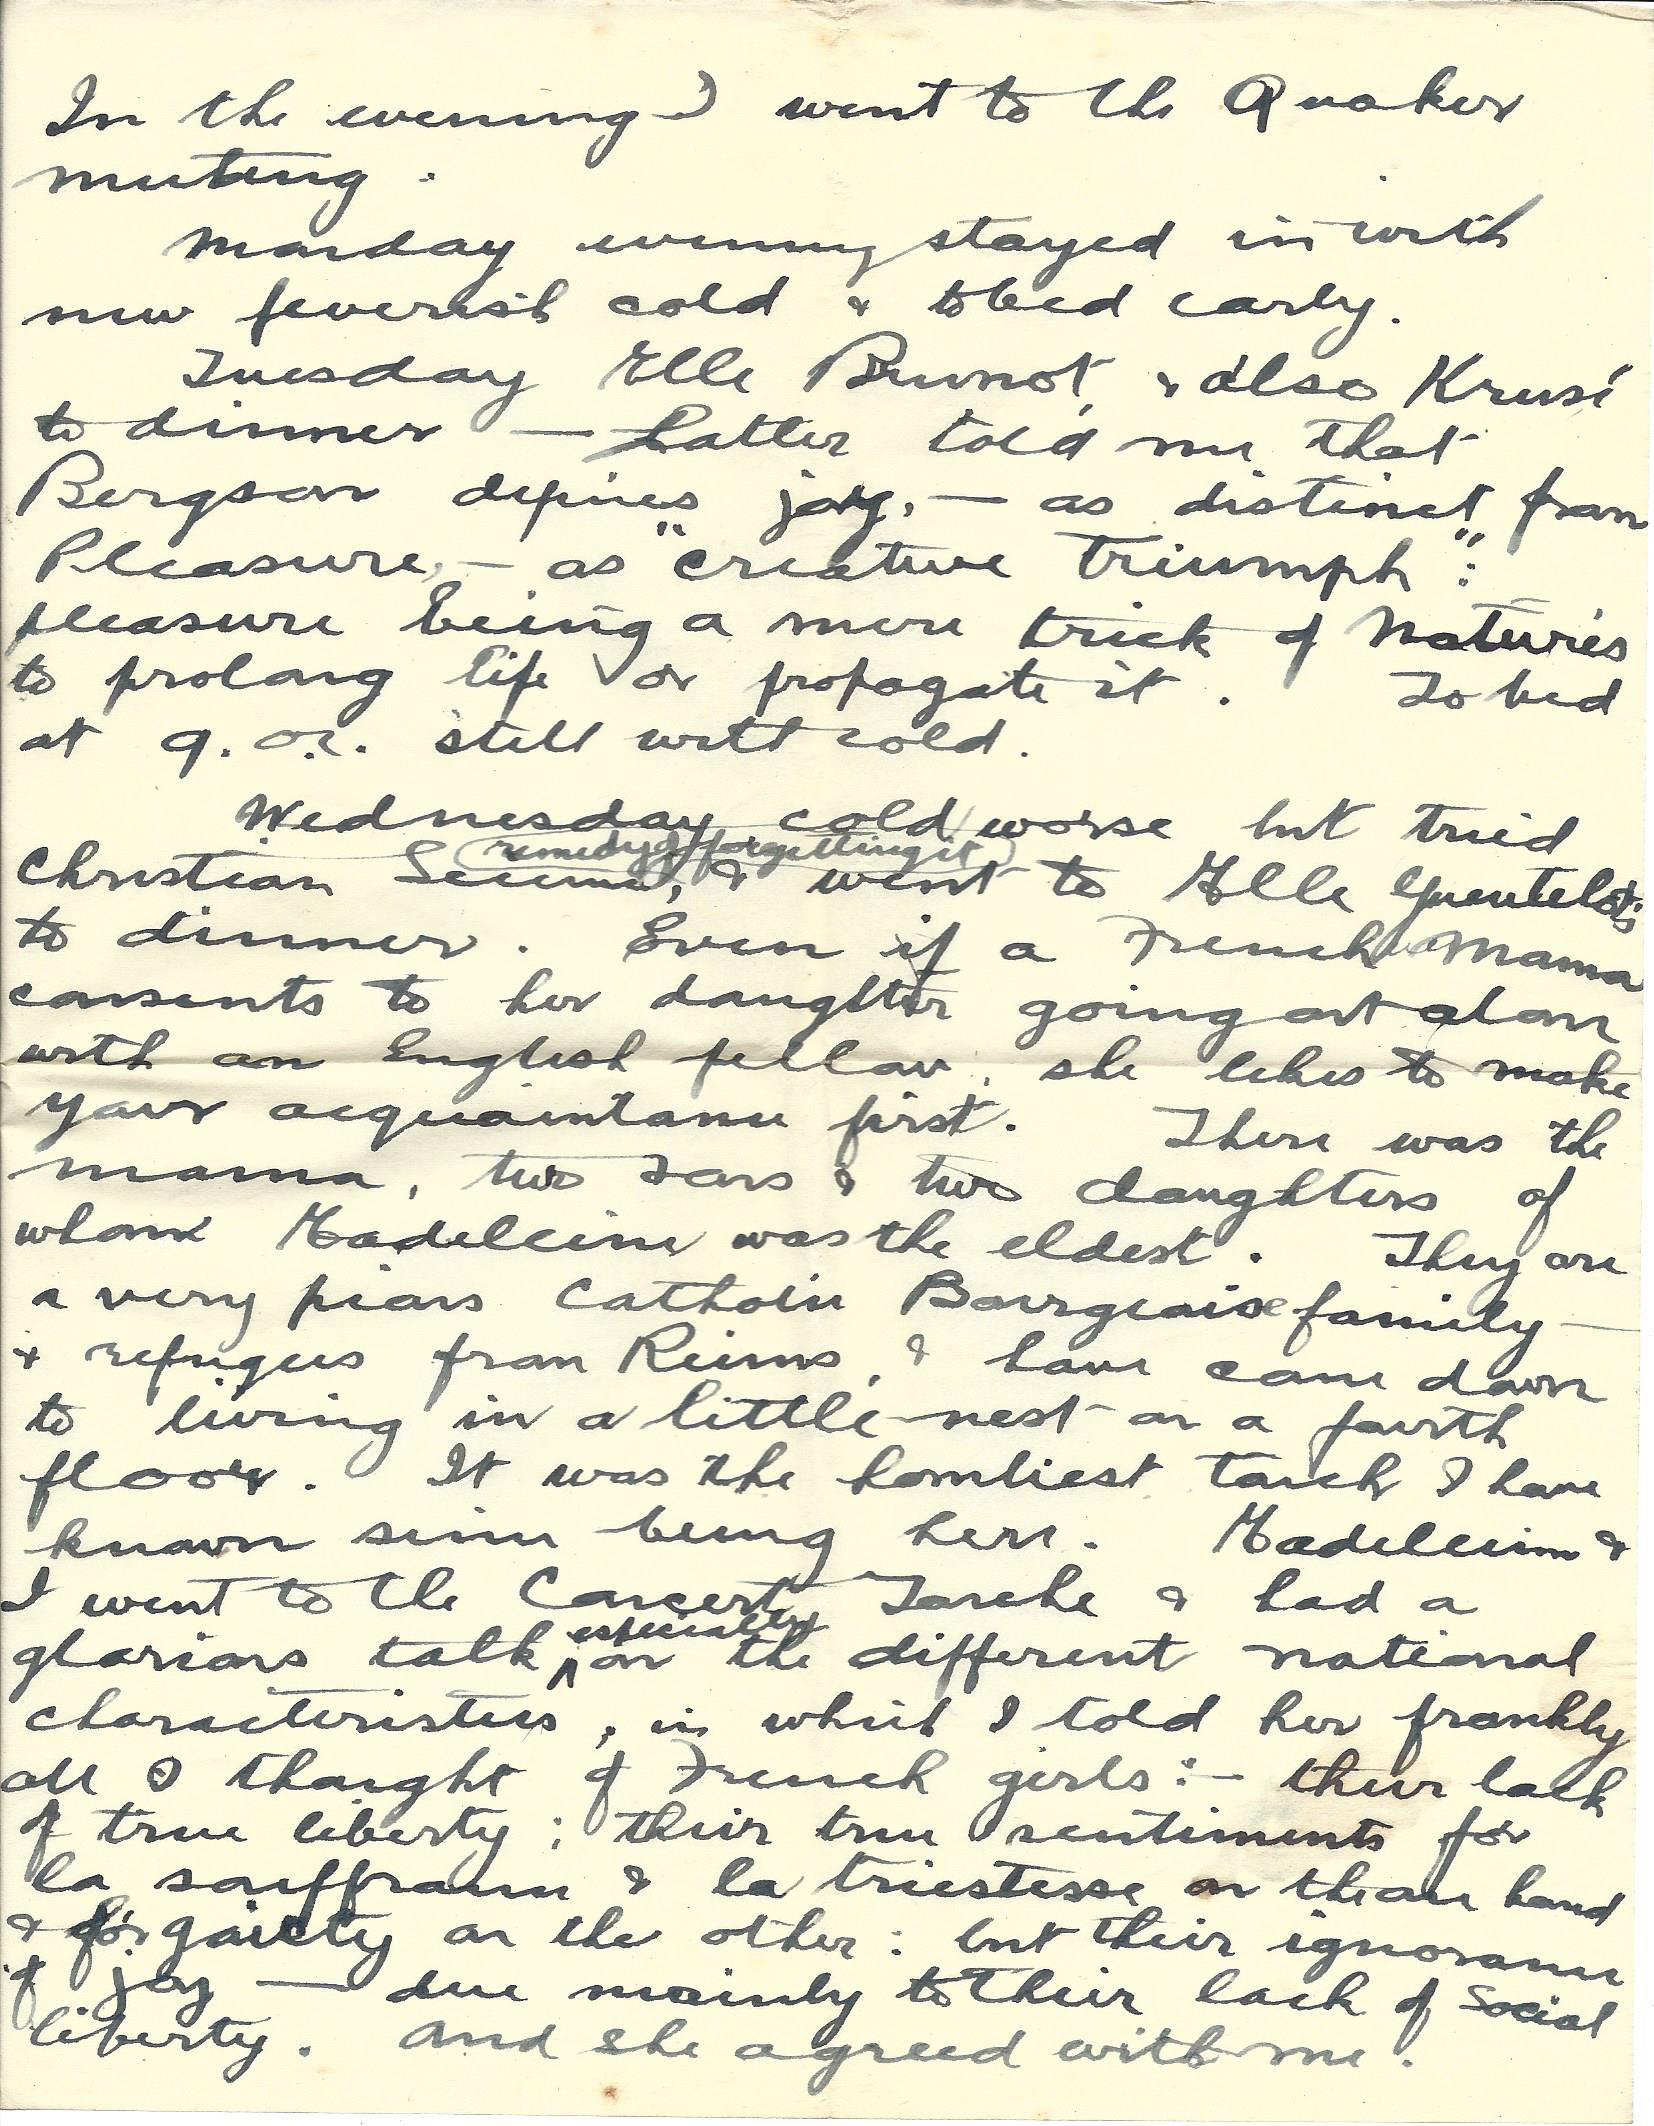 1920-02-28 p2 Donald Bearman letter to his father